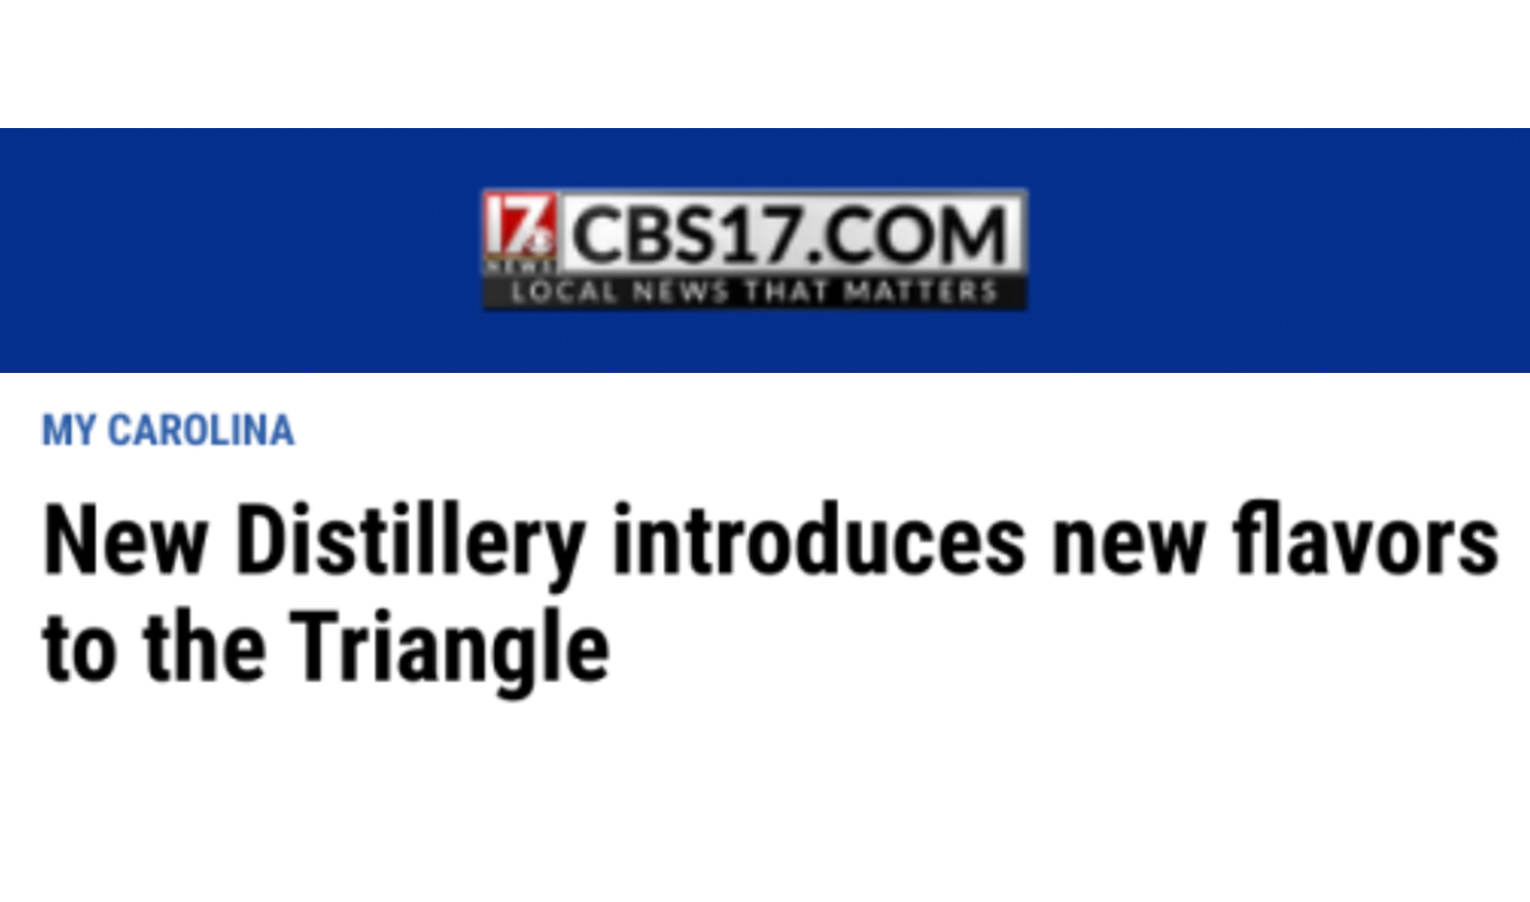 CBS 17 New Distillery introduces new flavors to the triangle